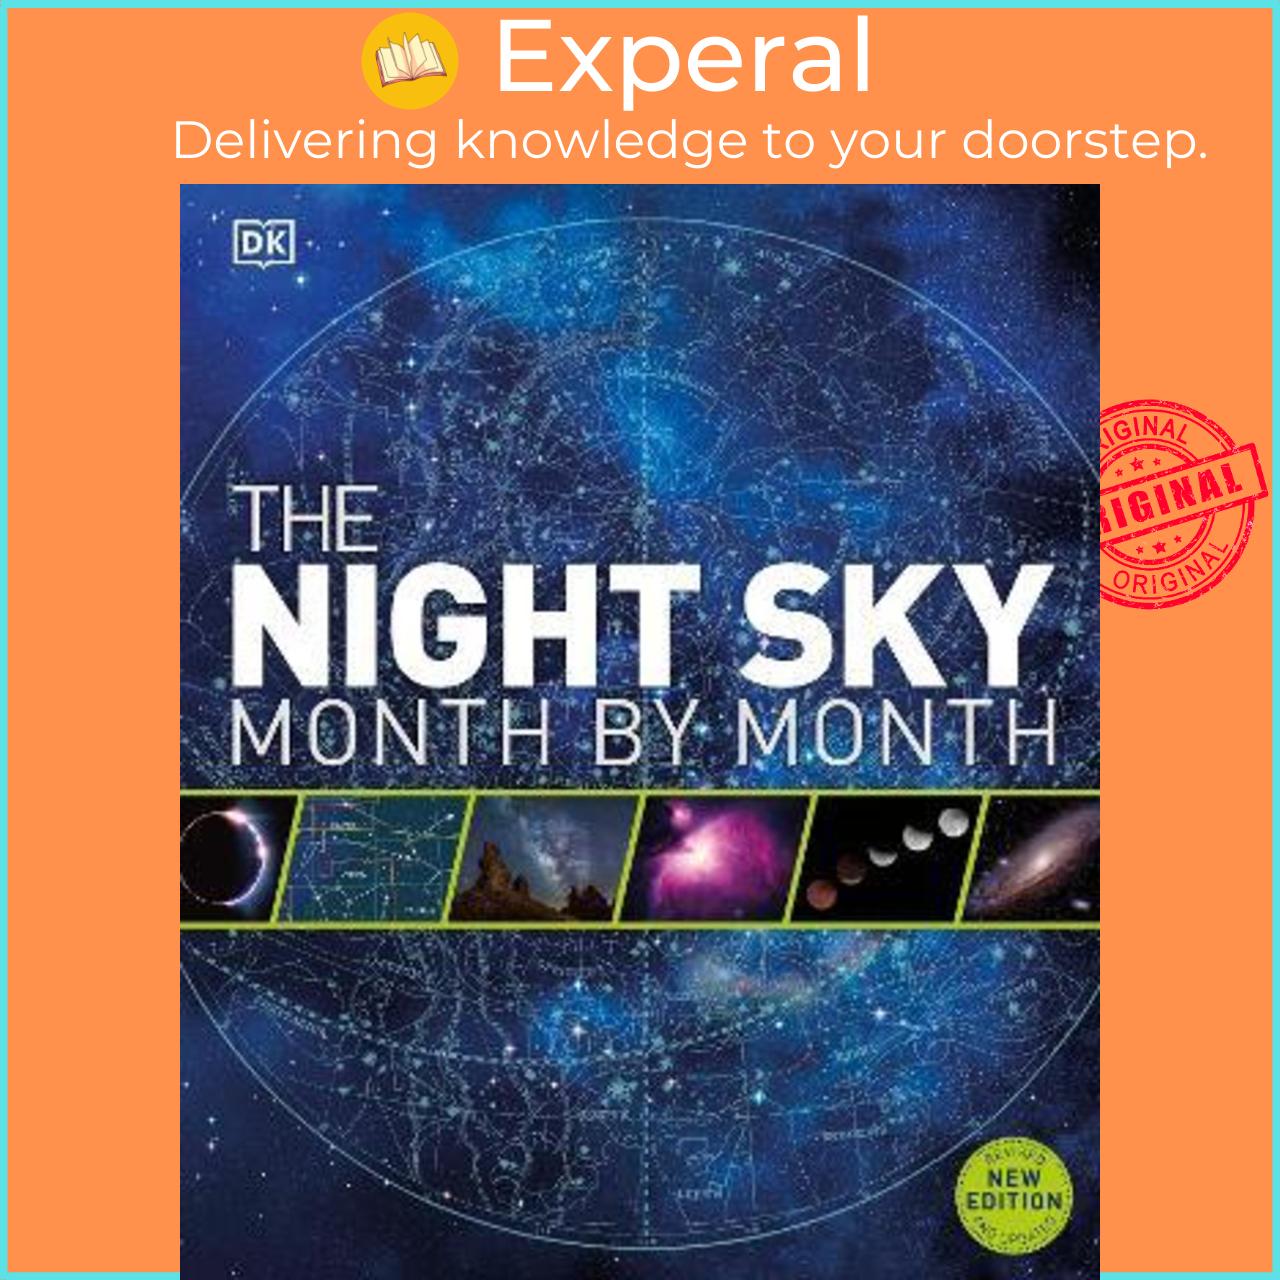 Sách - The Night Sky Month by Month by DK (UK edition, hardcover)